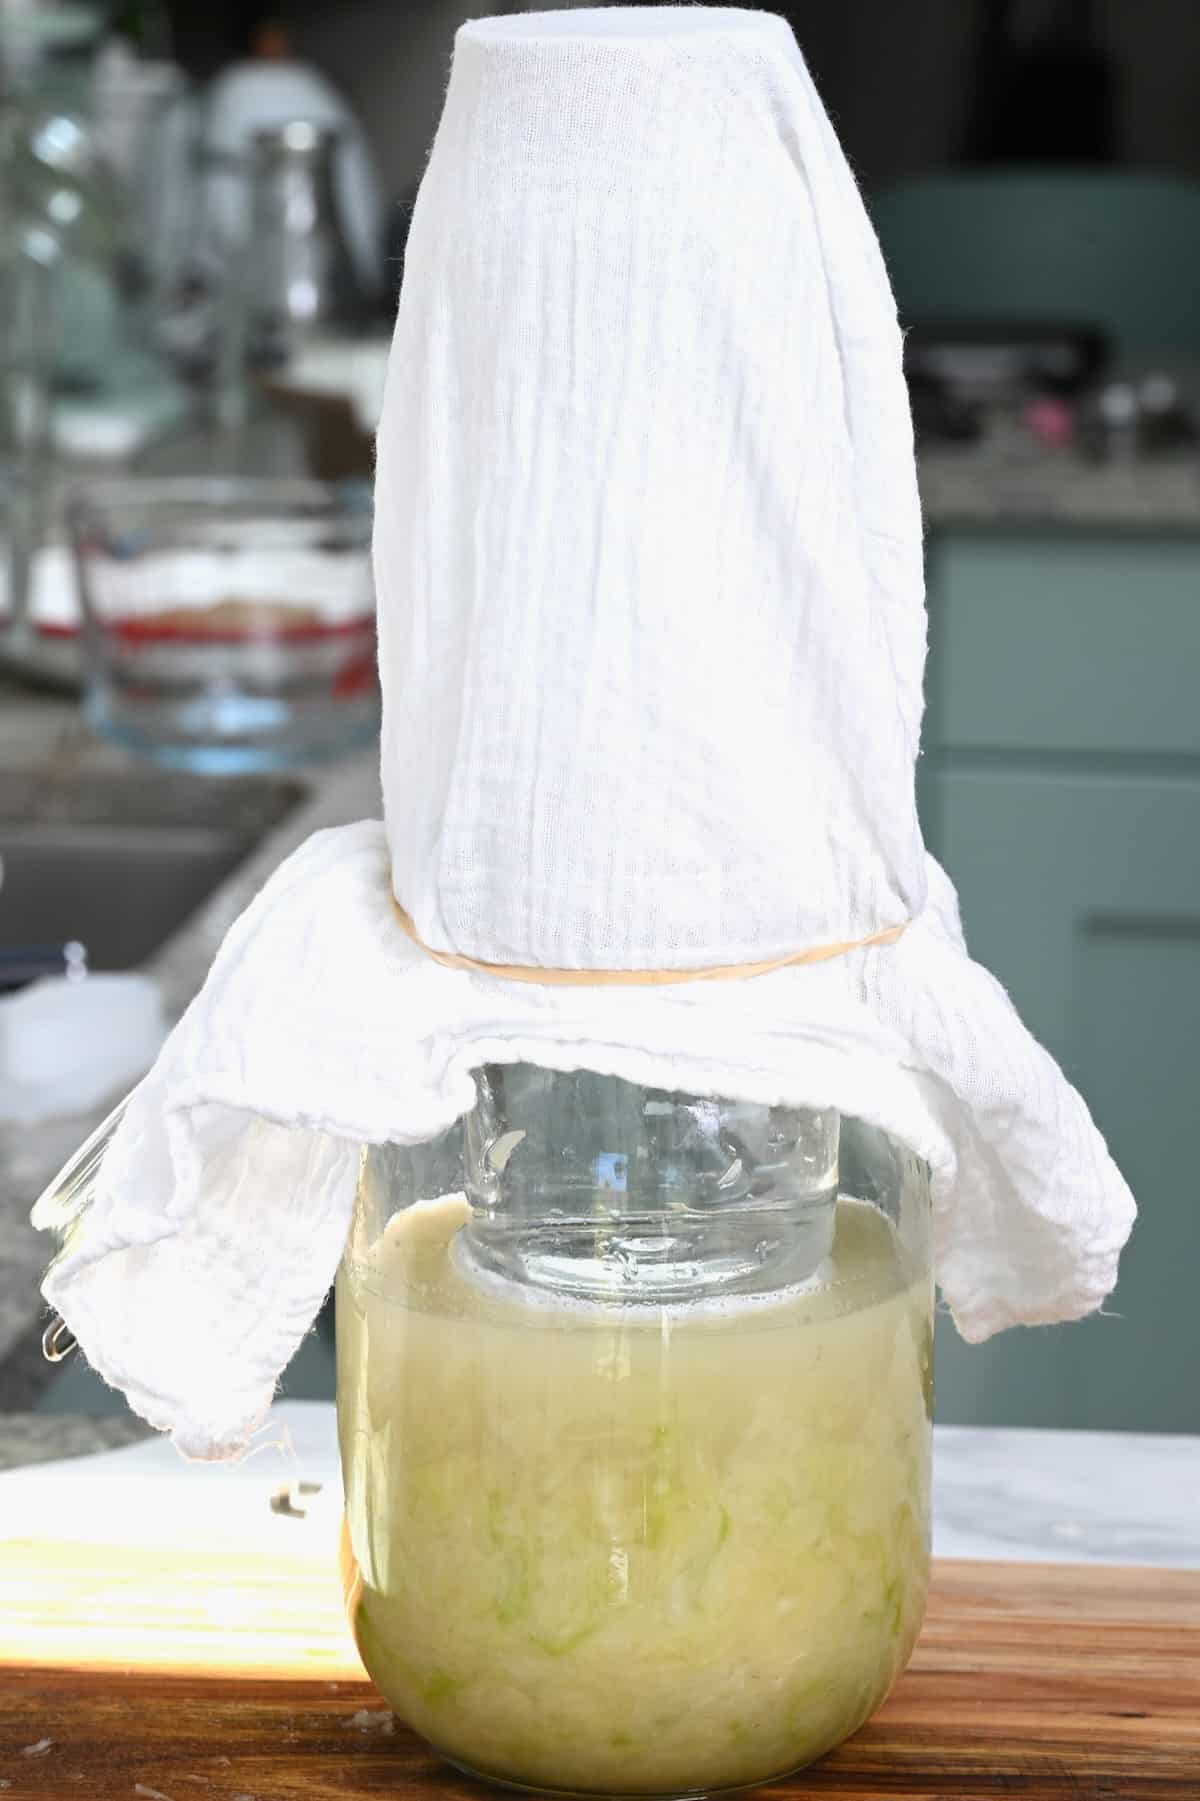 Making sauerkraut in a jar covered with towel